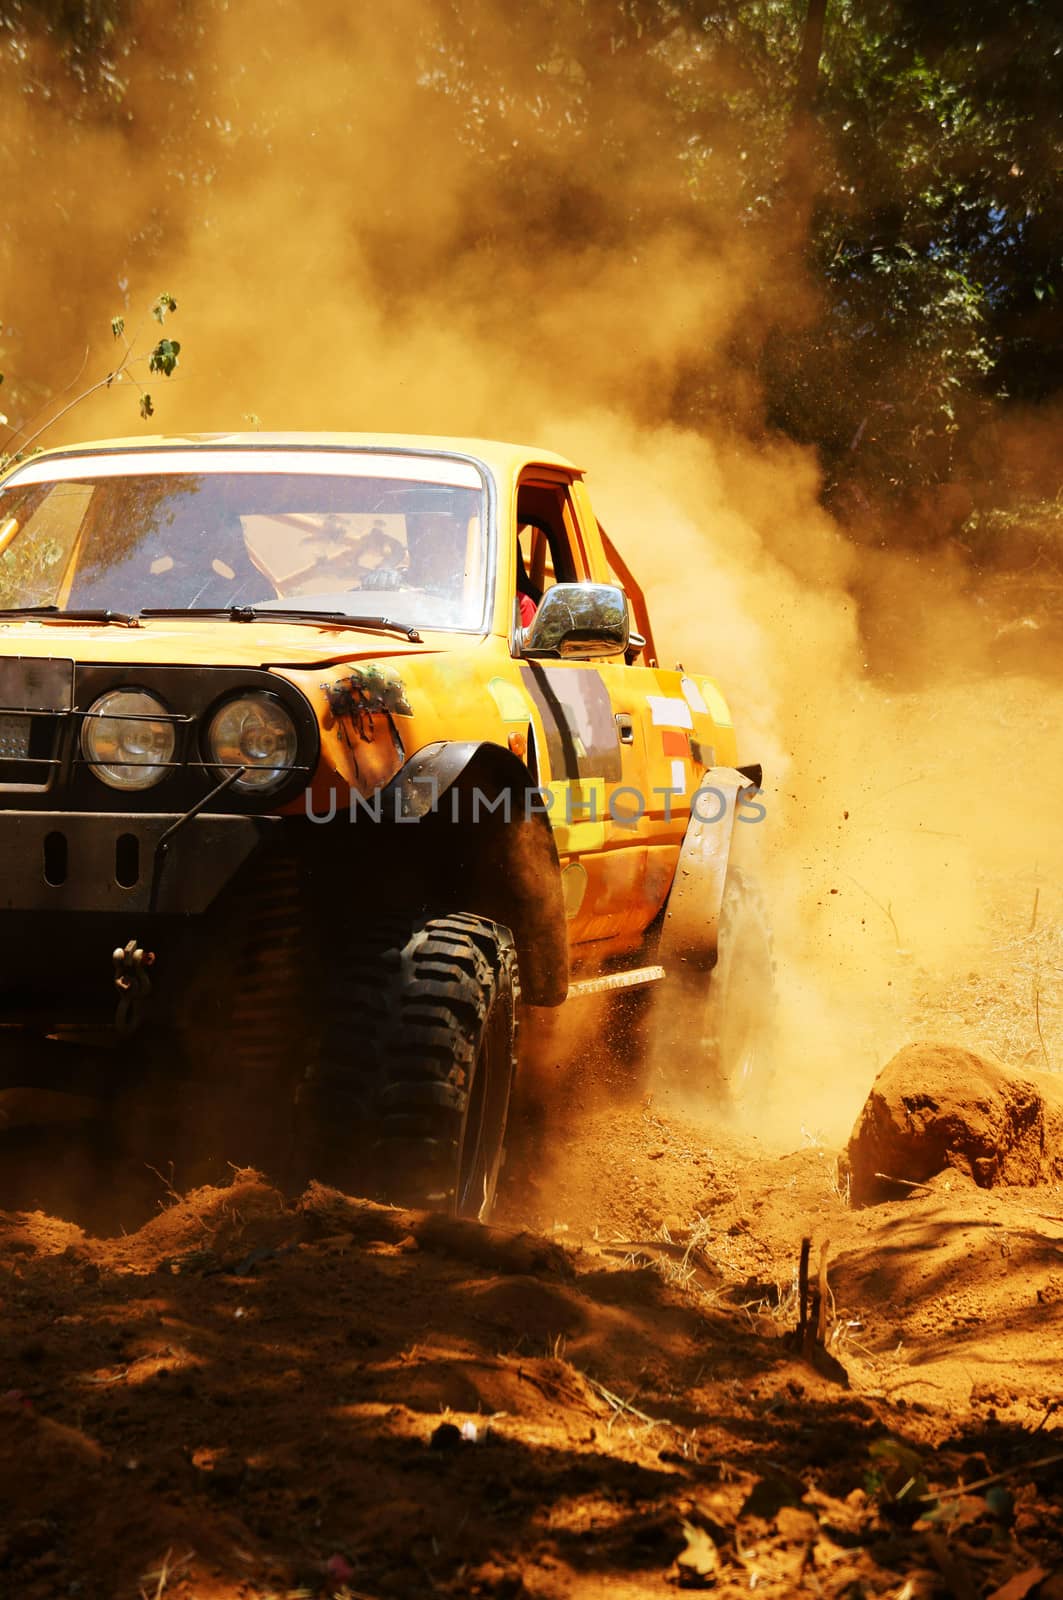 Racer at terrain racing car competition, the car try to cross extreme off road with red earth,  wheel make splash of soil and dusty air, competitor  adventure in championship spirit 